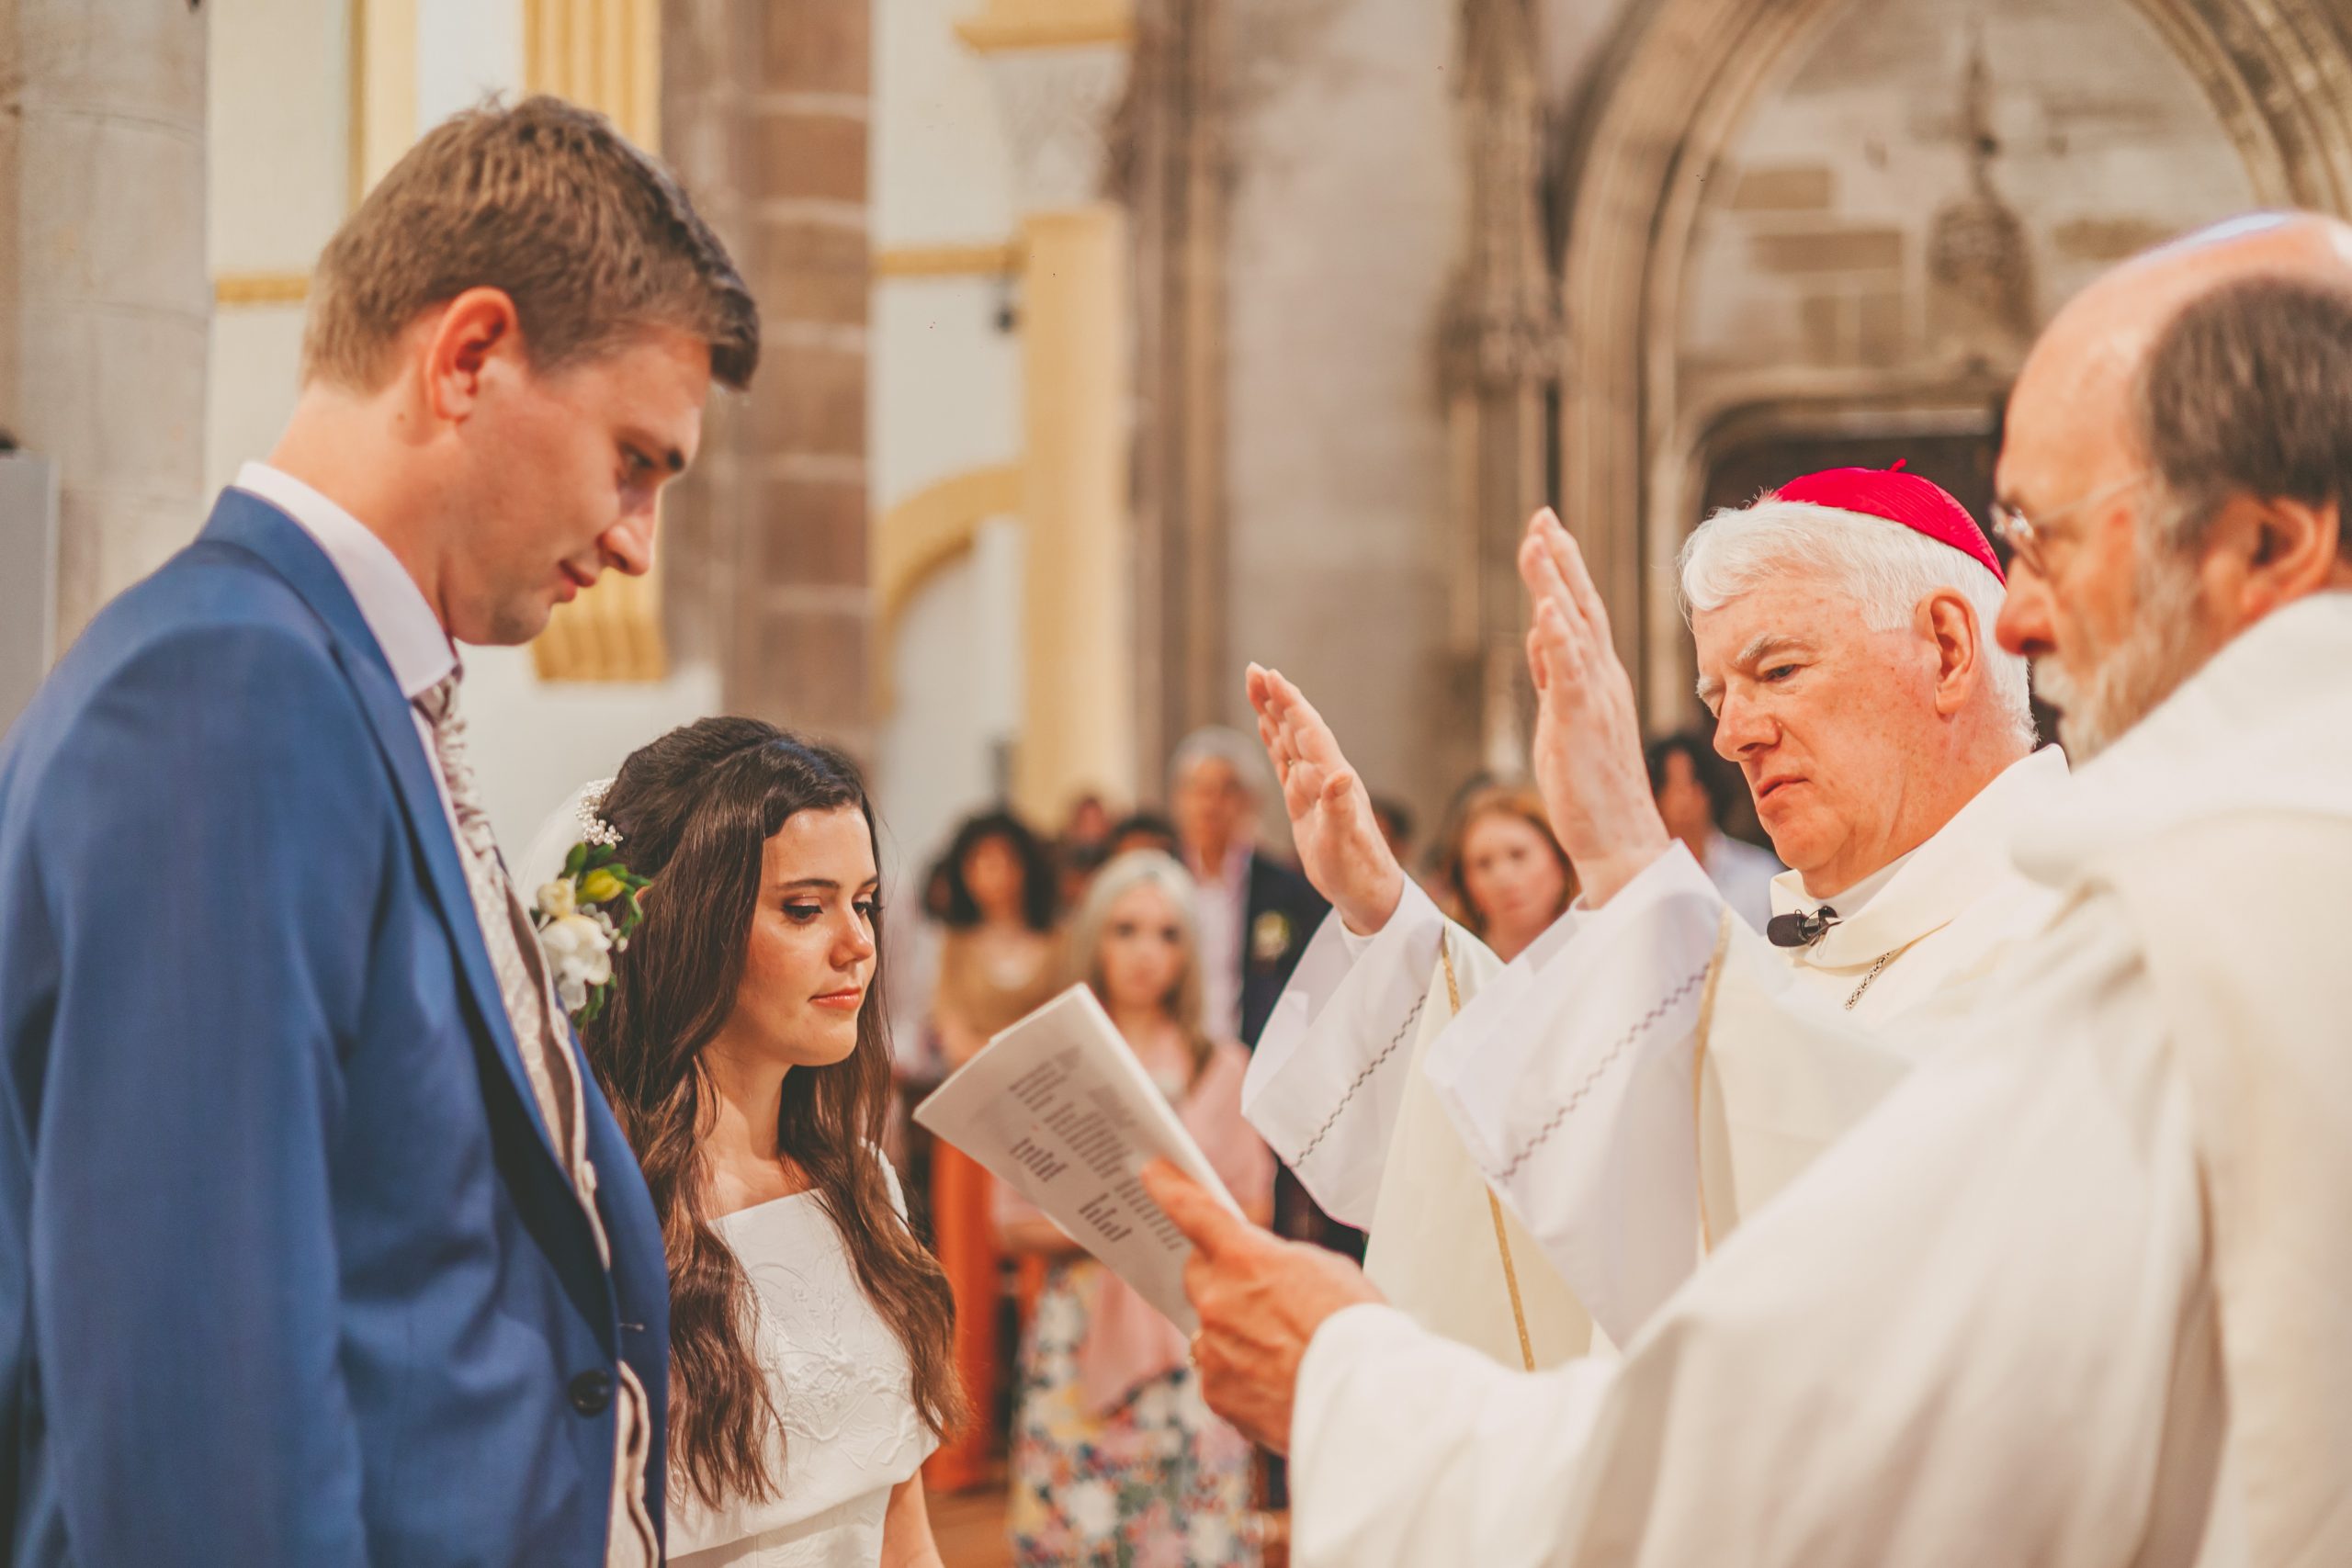 The wedding service for Théo Lunte and Frances Sadler is performed by Archbishop and Apostolic Nunciature to the European Union Noël Treanor and Michael Kuhn, deacon at L'église Saint Pierre et Saint Paul in Souvigny, France.